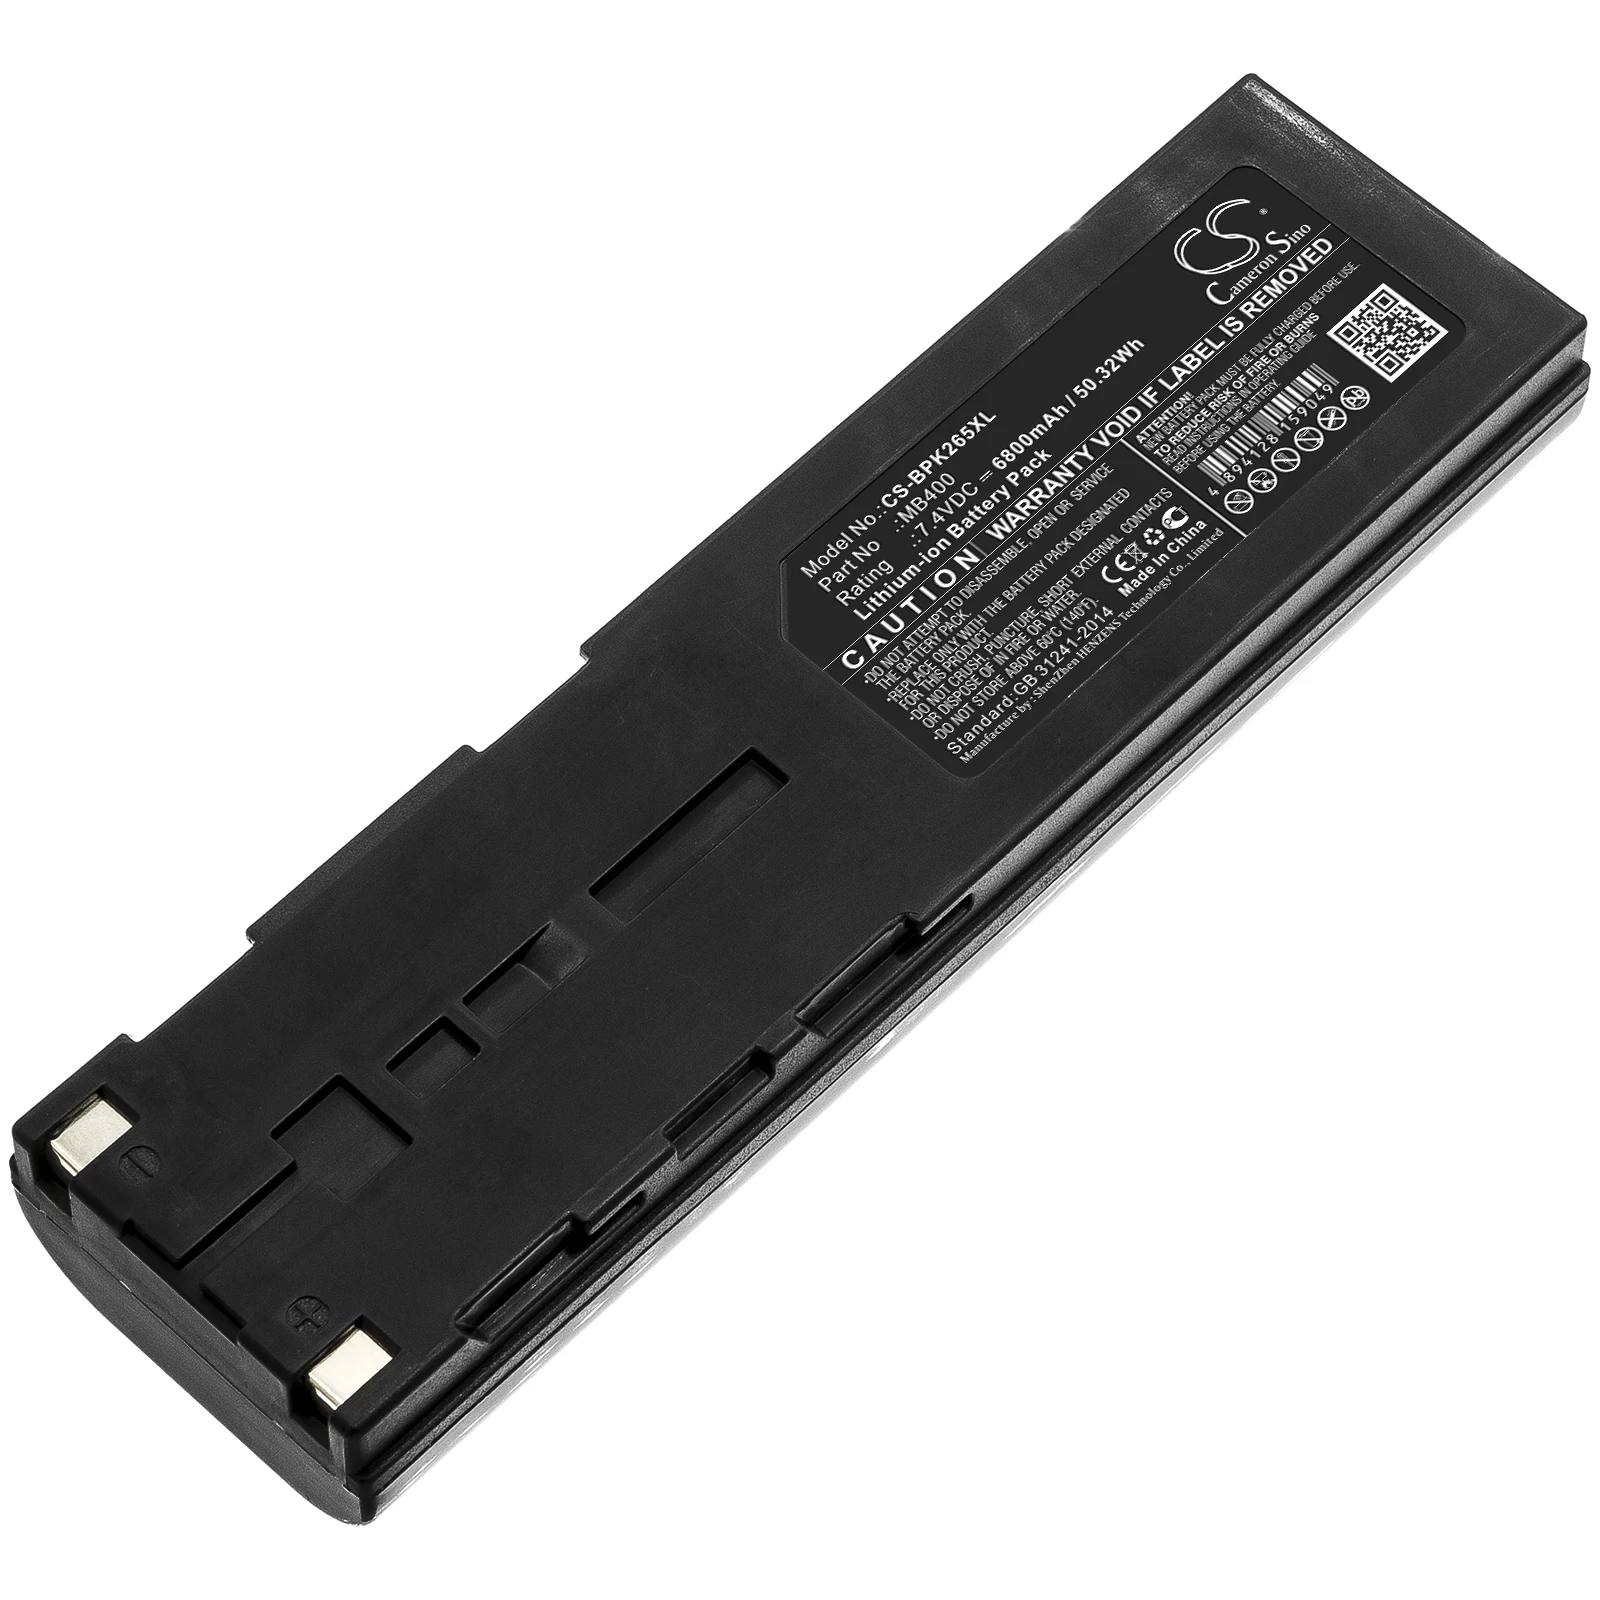 

CS 6800mAh / 50.32Wh battery for BK Precision 2650A, 2652A, 2658A MB400